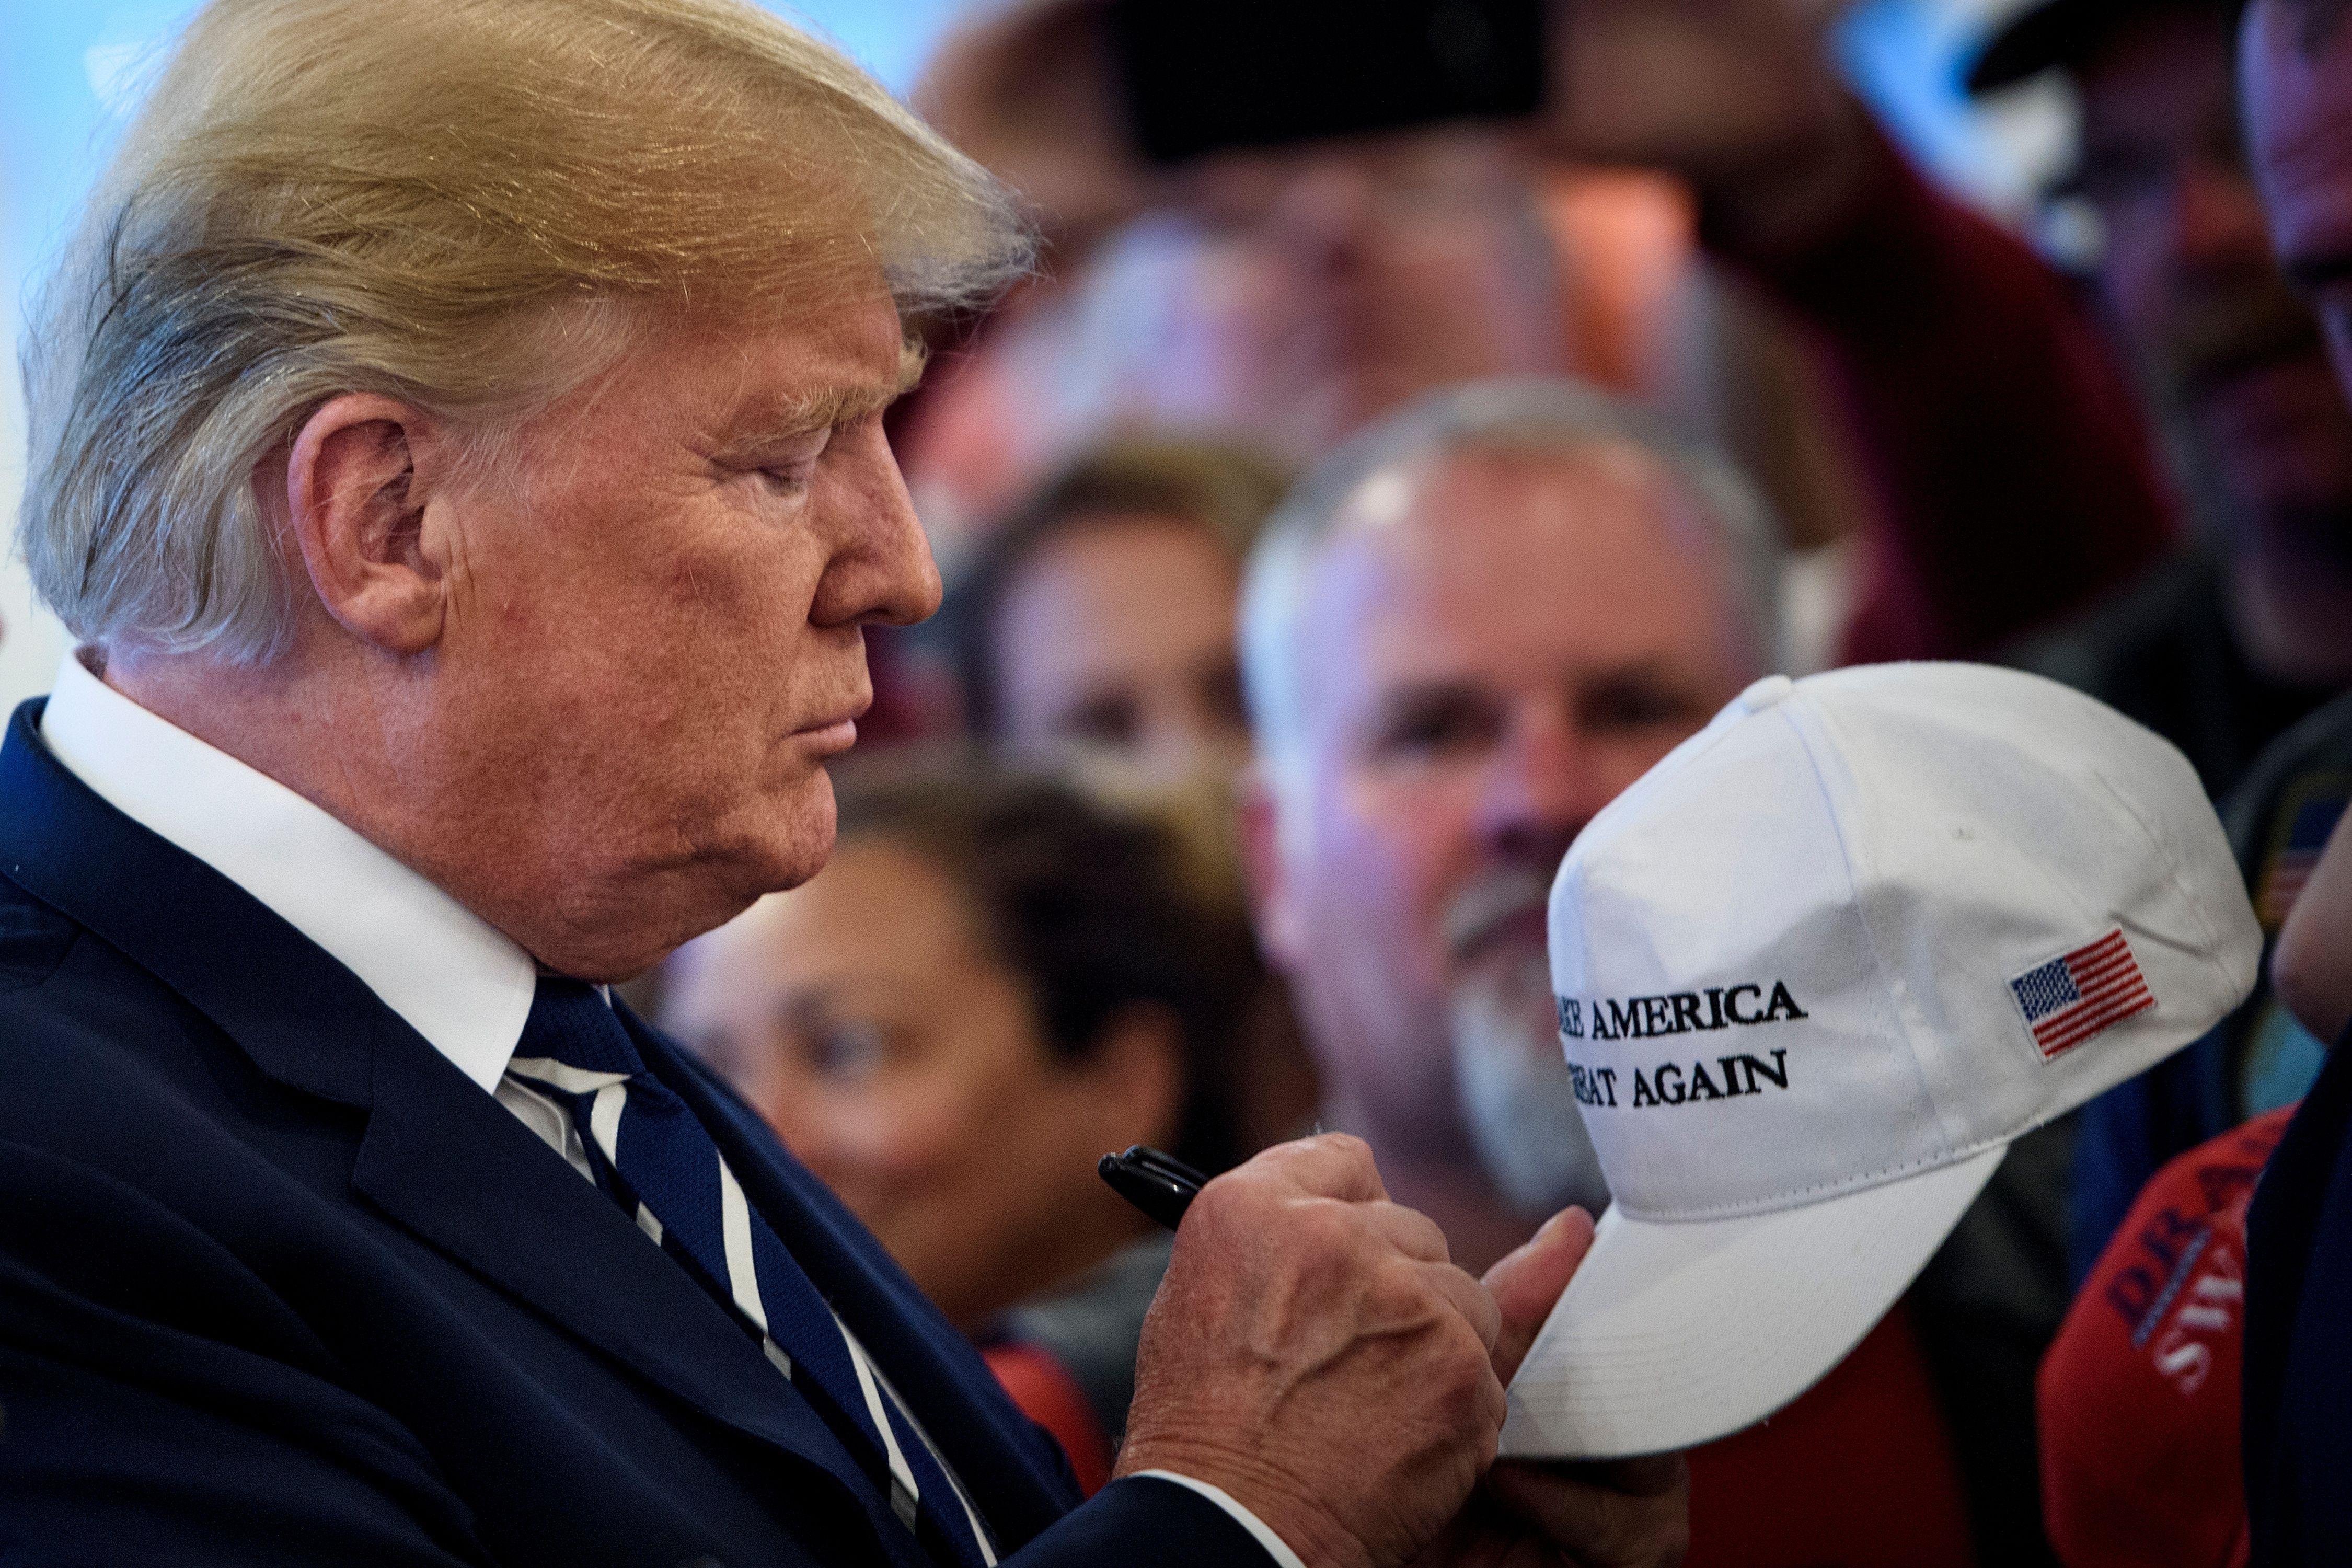 President Donald Trump signs a hat while meeting with supporters during a Bikers for Trump event at the Trump National Golf Club August 11, 2018 in Bedminster, New Jersey. 